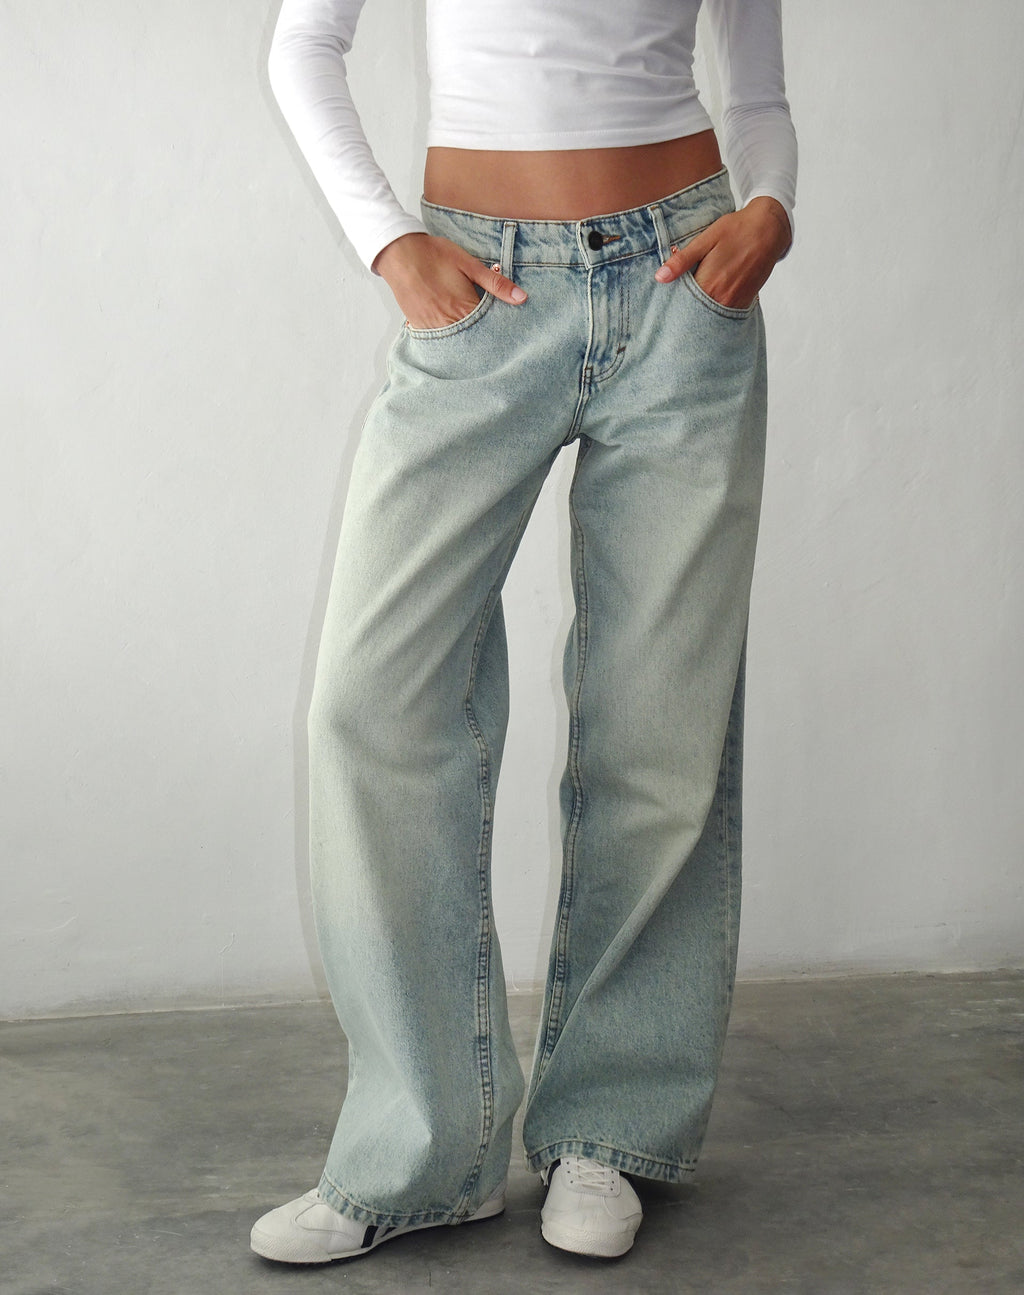 Geräumige extra weite Low Rise Jeans in Super Bleached Wash